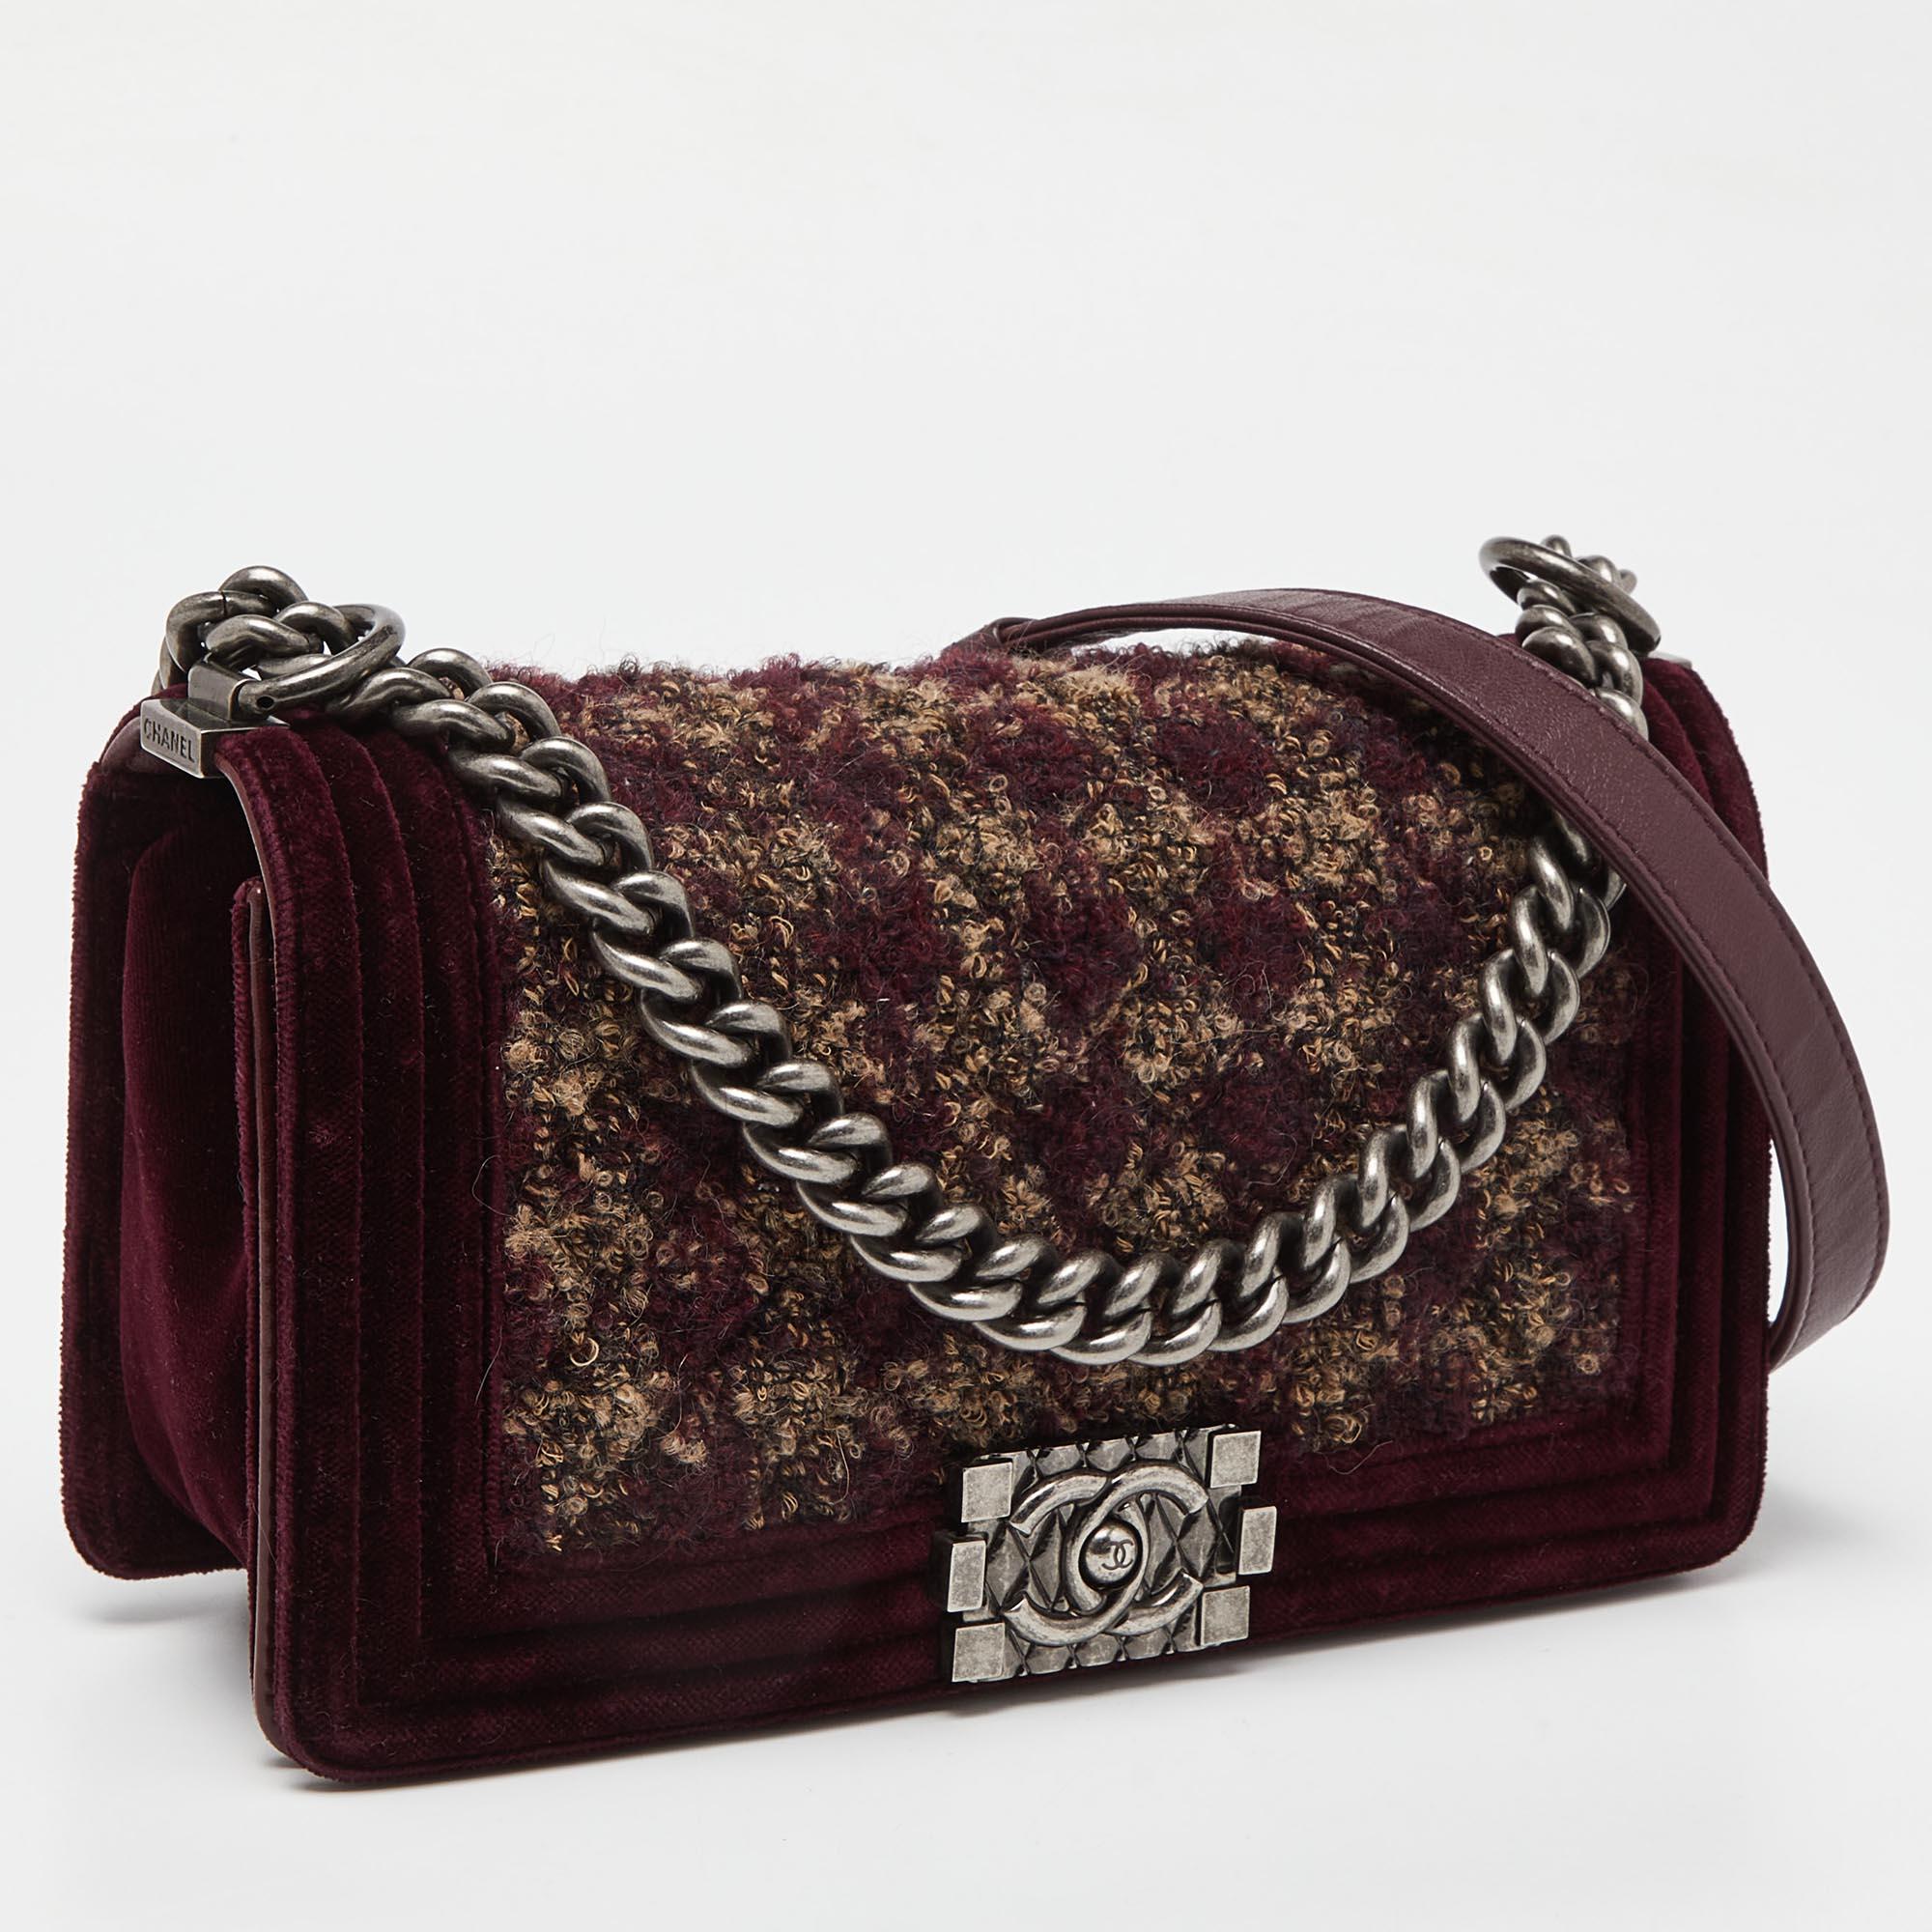 Chanel Burgundy Quilted Tweed Leather and Velvet Medium Boy Flap Bag For Sale 6